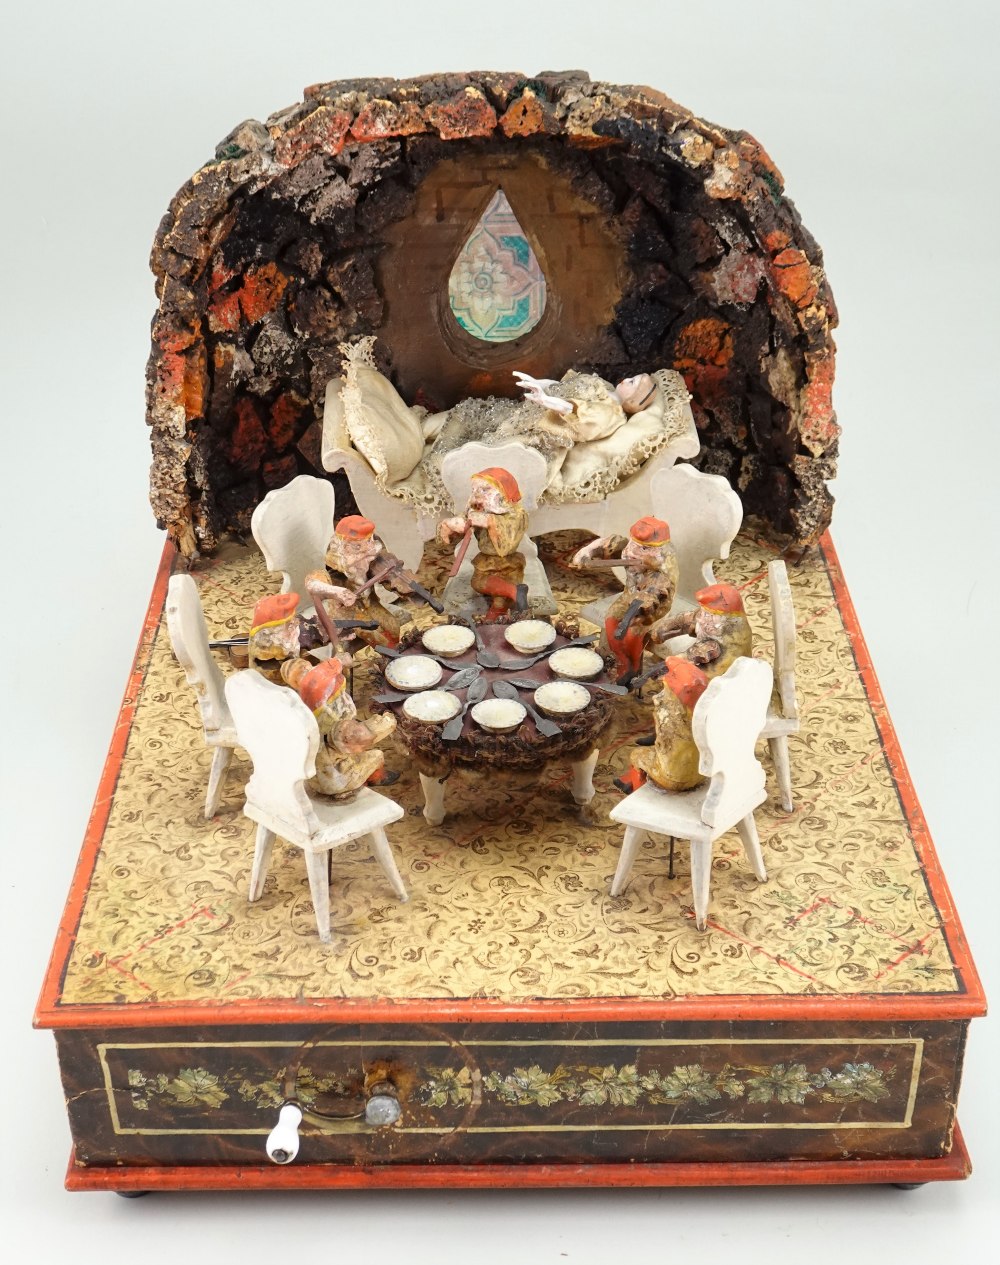 Extremely rare Zinner & Sohn Snow White and the seven dwarfs mechanical music automata, German circa